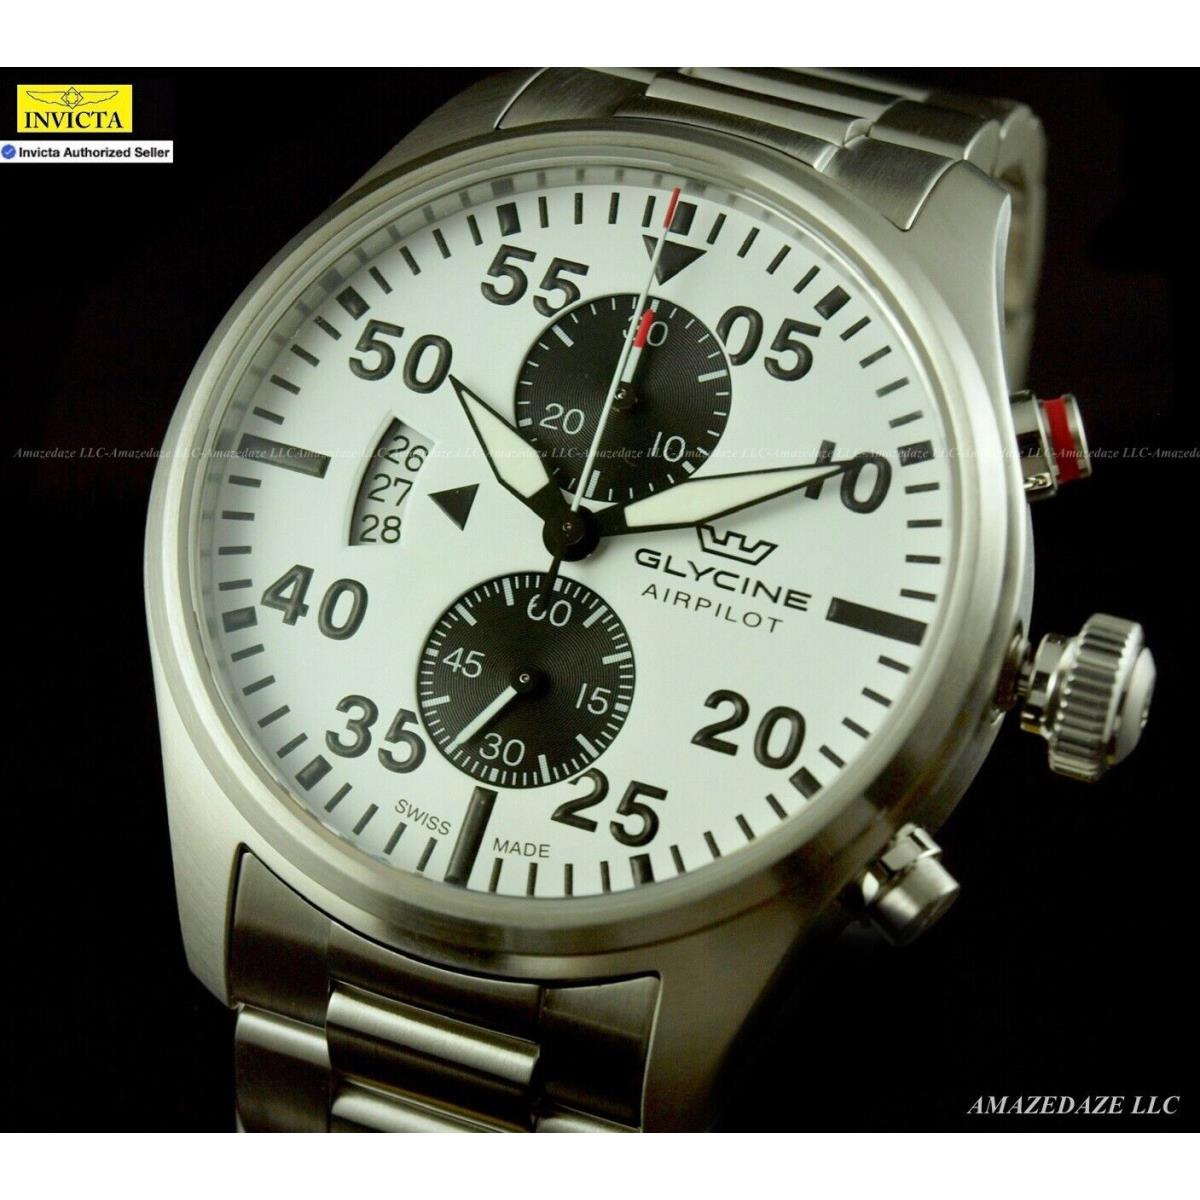 Glycine watch Air Pilot - White Dial, Steel Band